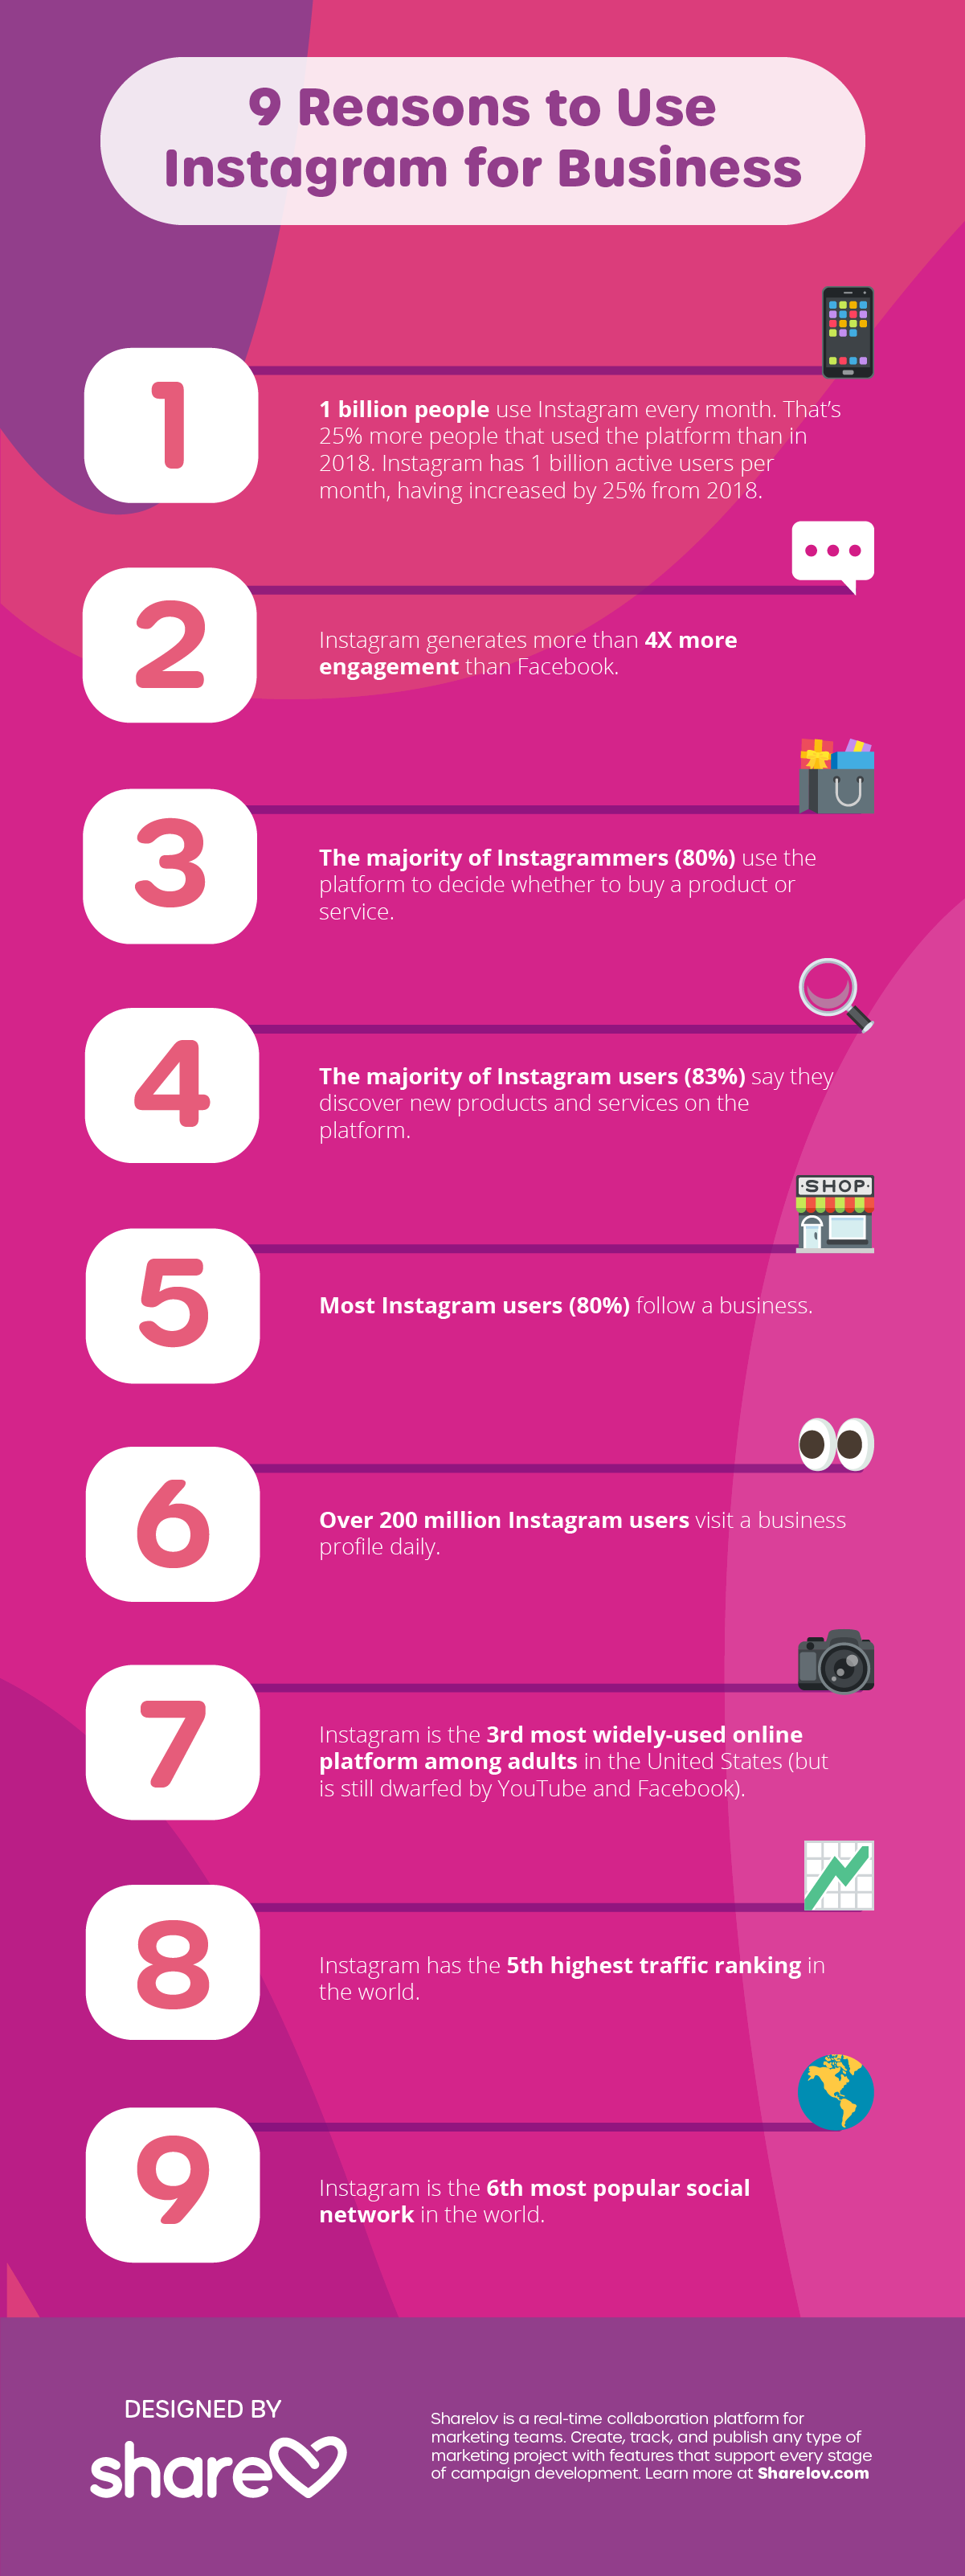 9 Reasons to Use Instagram for Business infographic